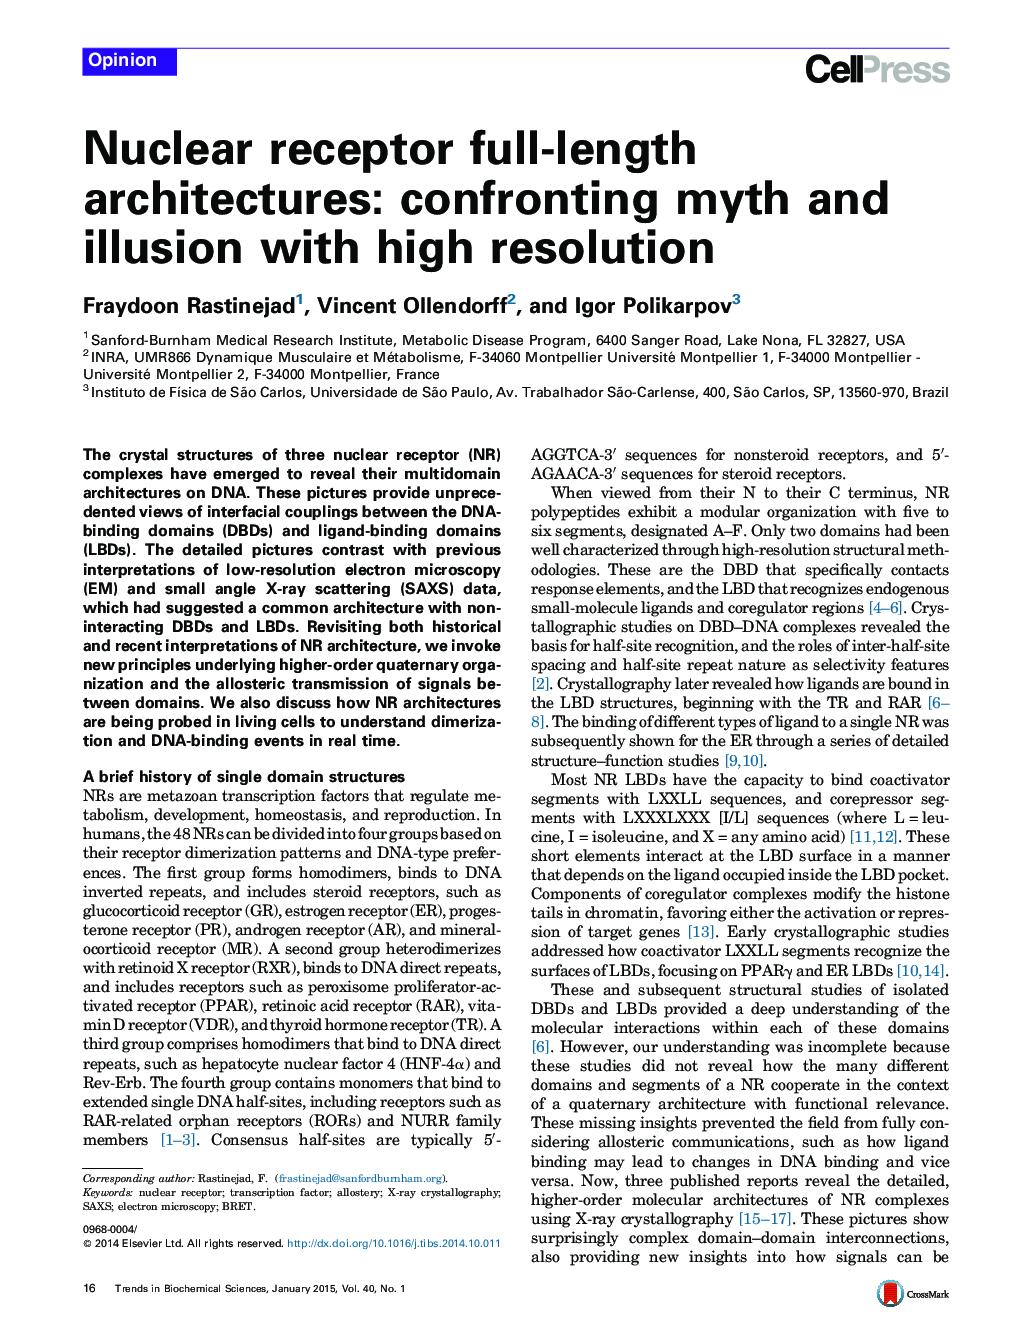 Nuclear receptor full-length architectures: confronting myth and illusion with high resolution